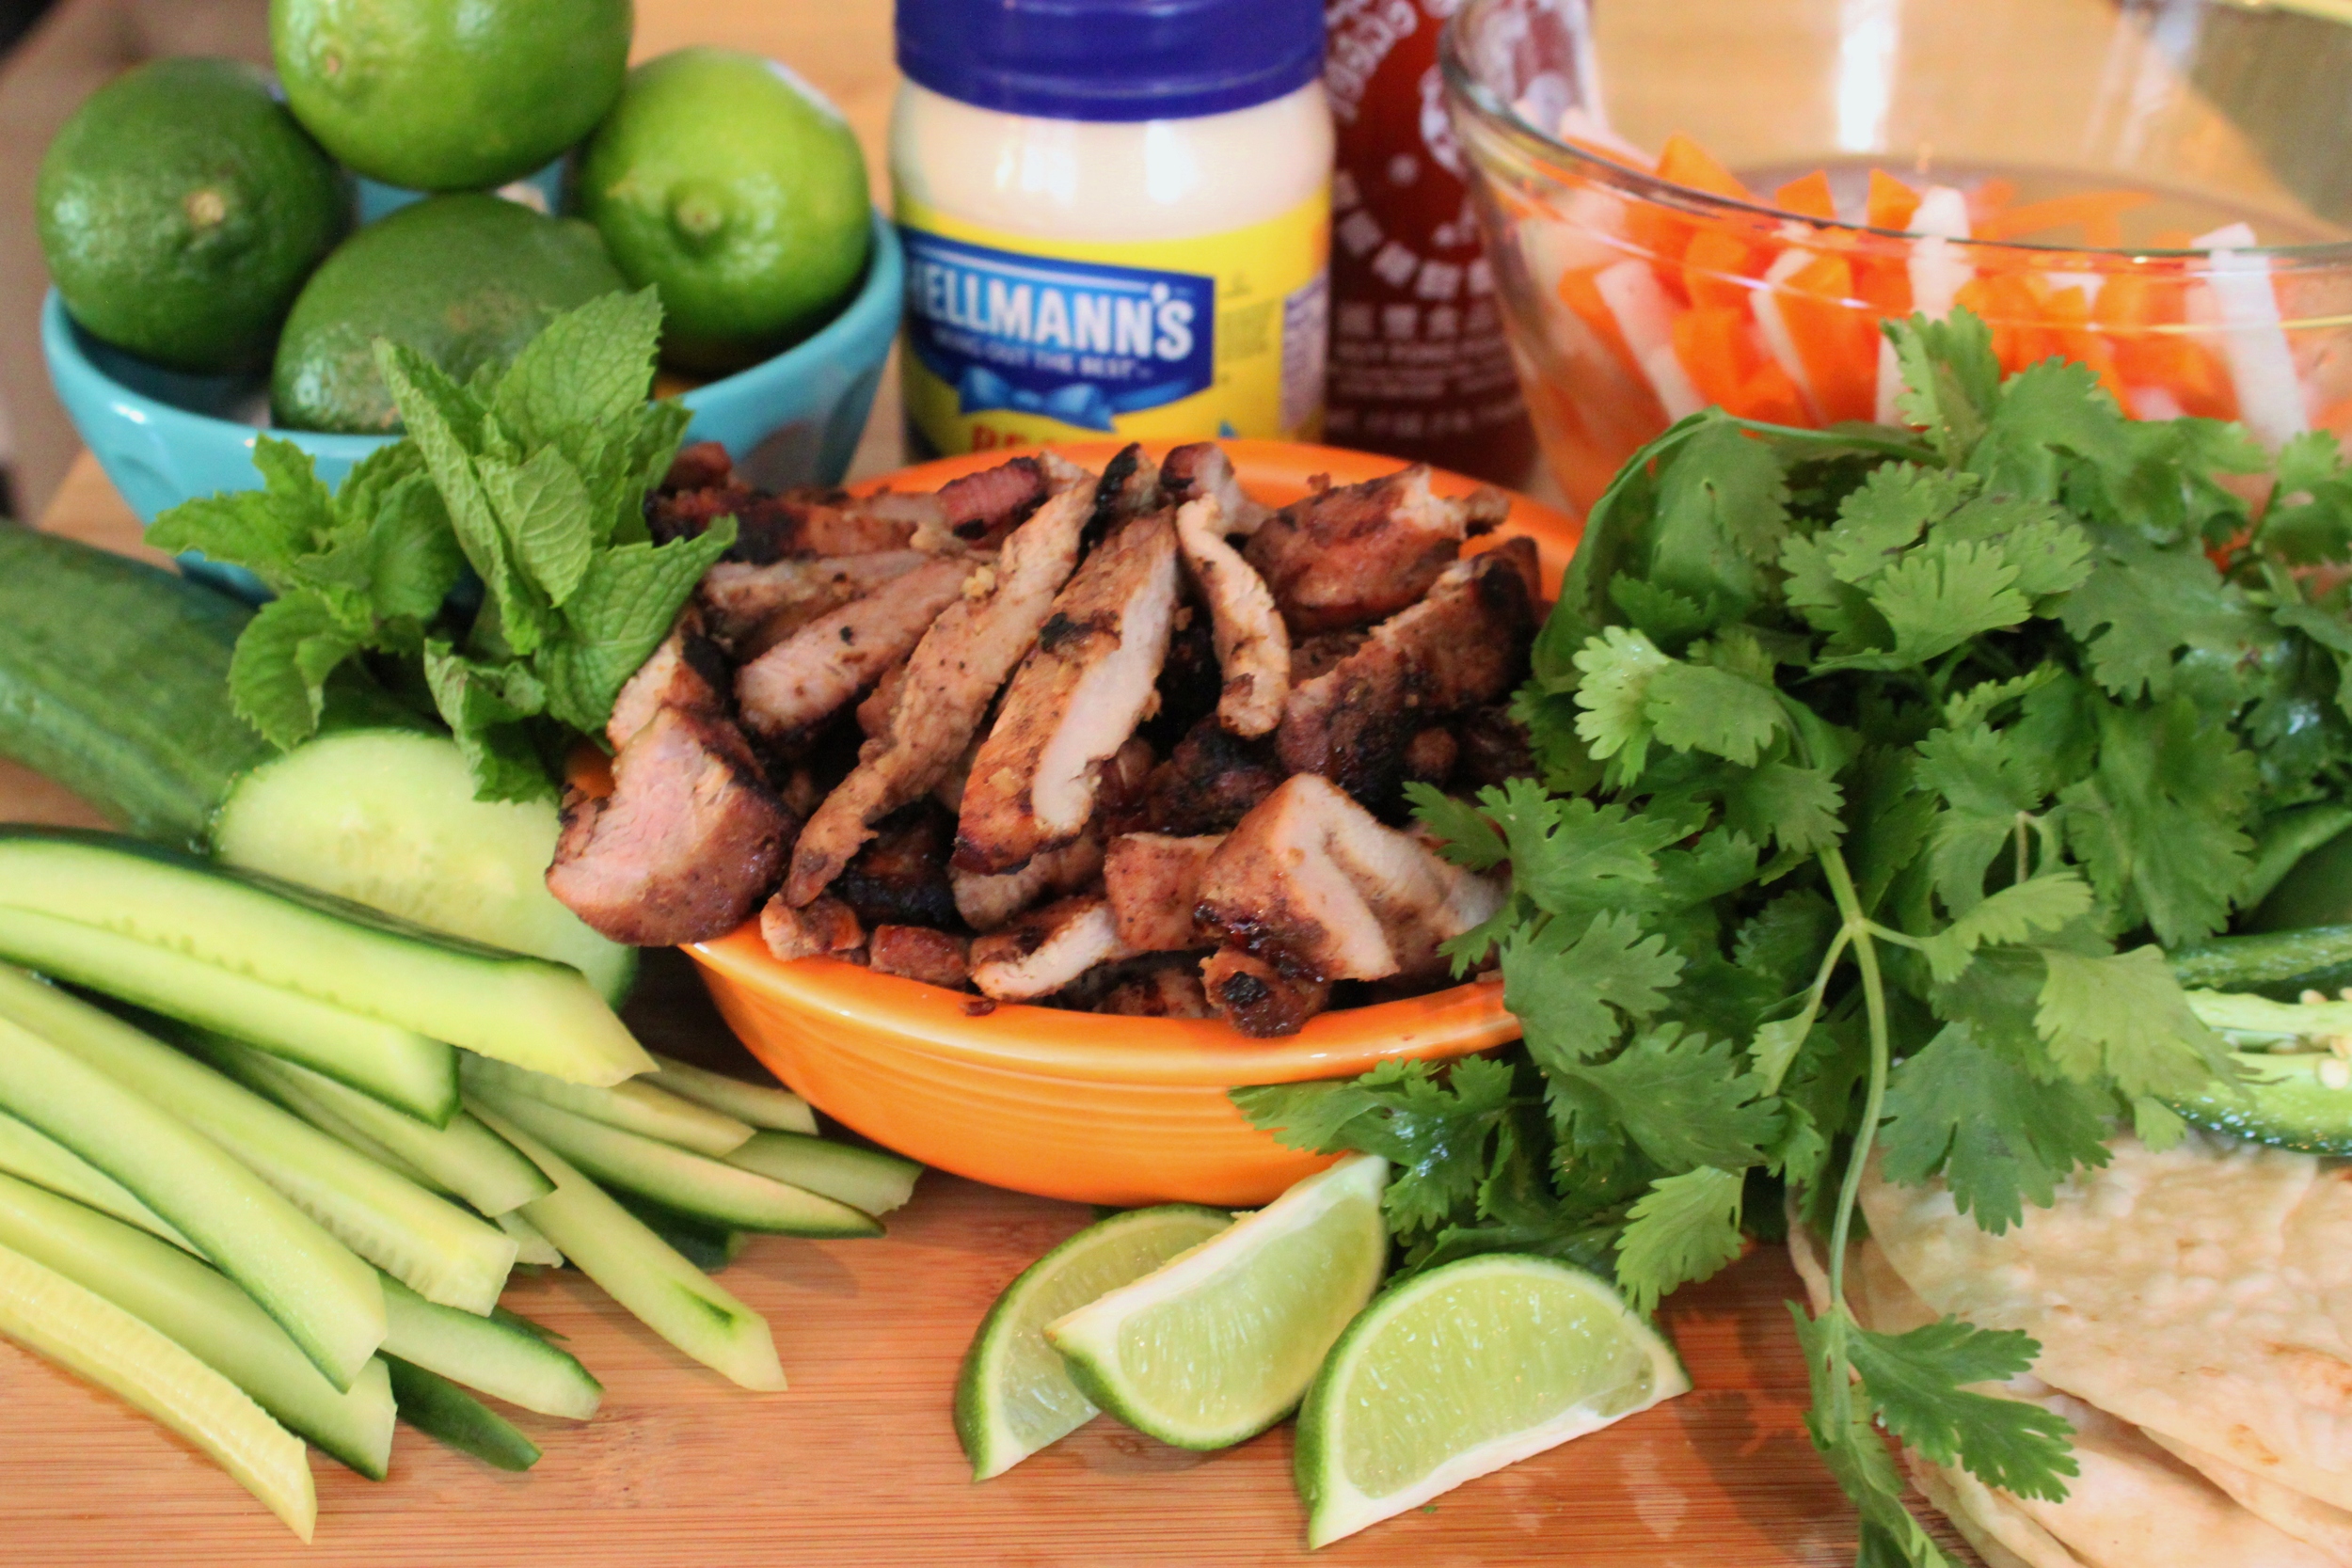 all-the-ingredients-to-assemble-banh-mi-tacos.jpg